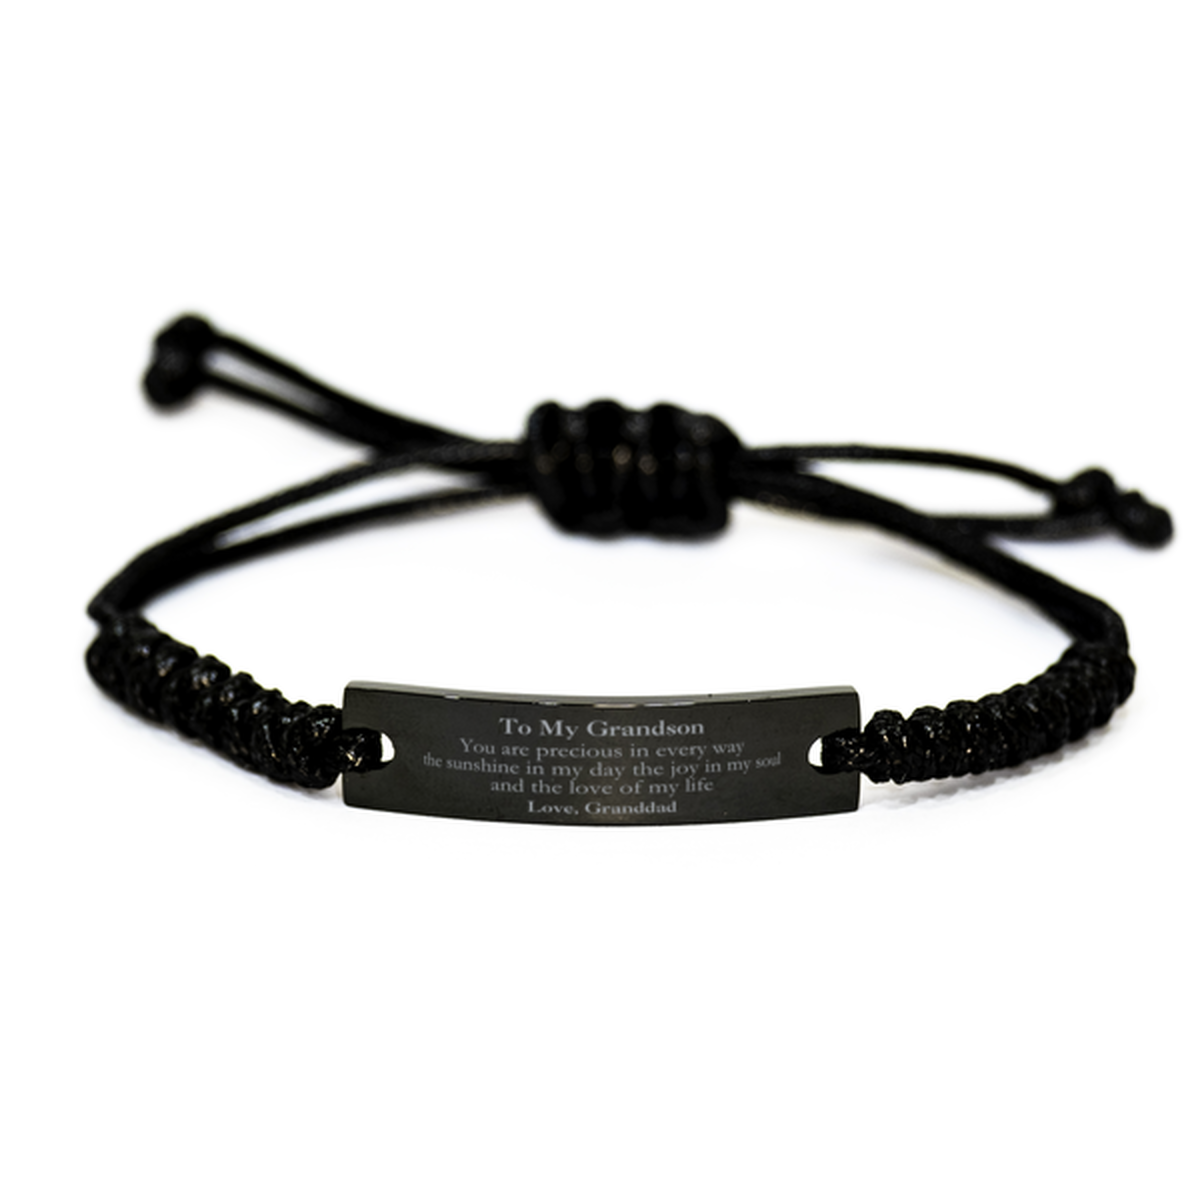 Graduation Gifts for Grandson Black Rope Bracelet Present from Granddad, Christmas Grandson Birthday Gifts Grandson You are precious in every way the sunshine in my day. Love, Granddad